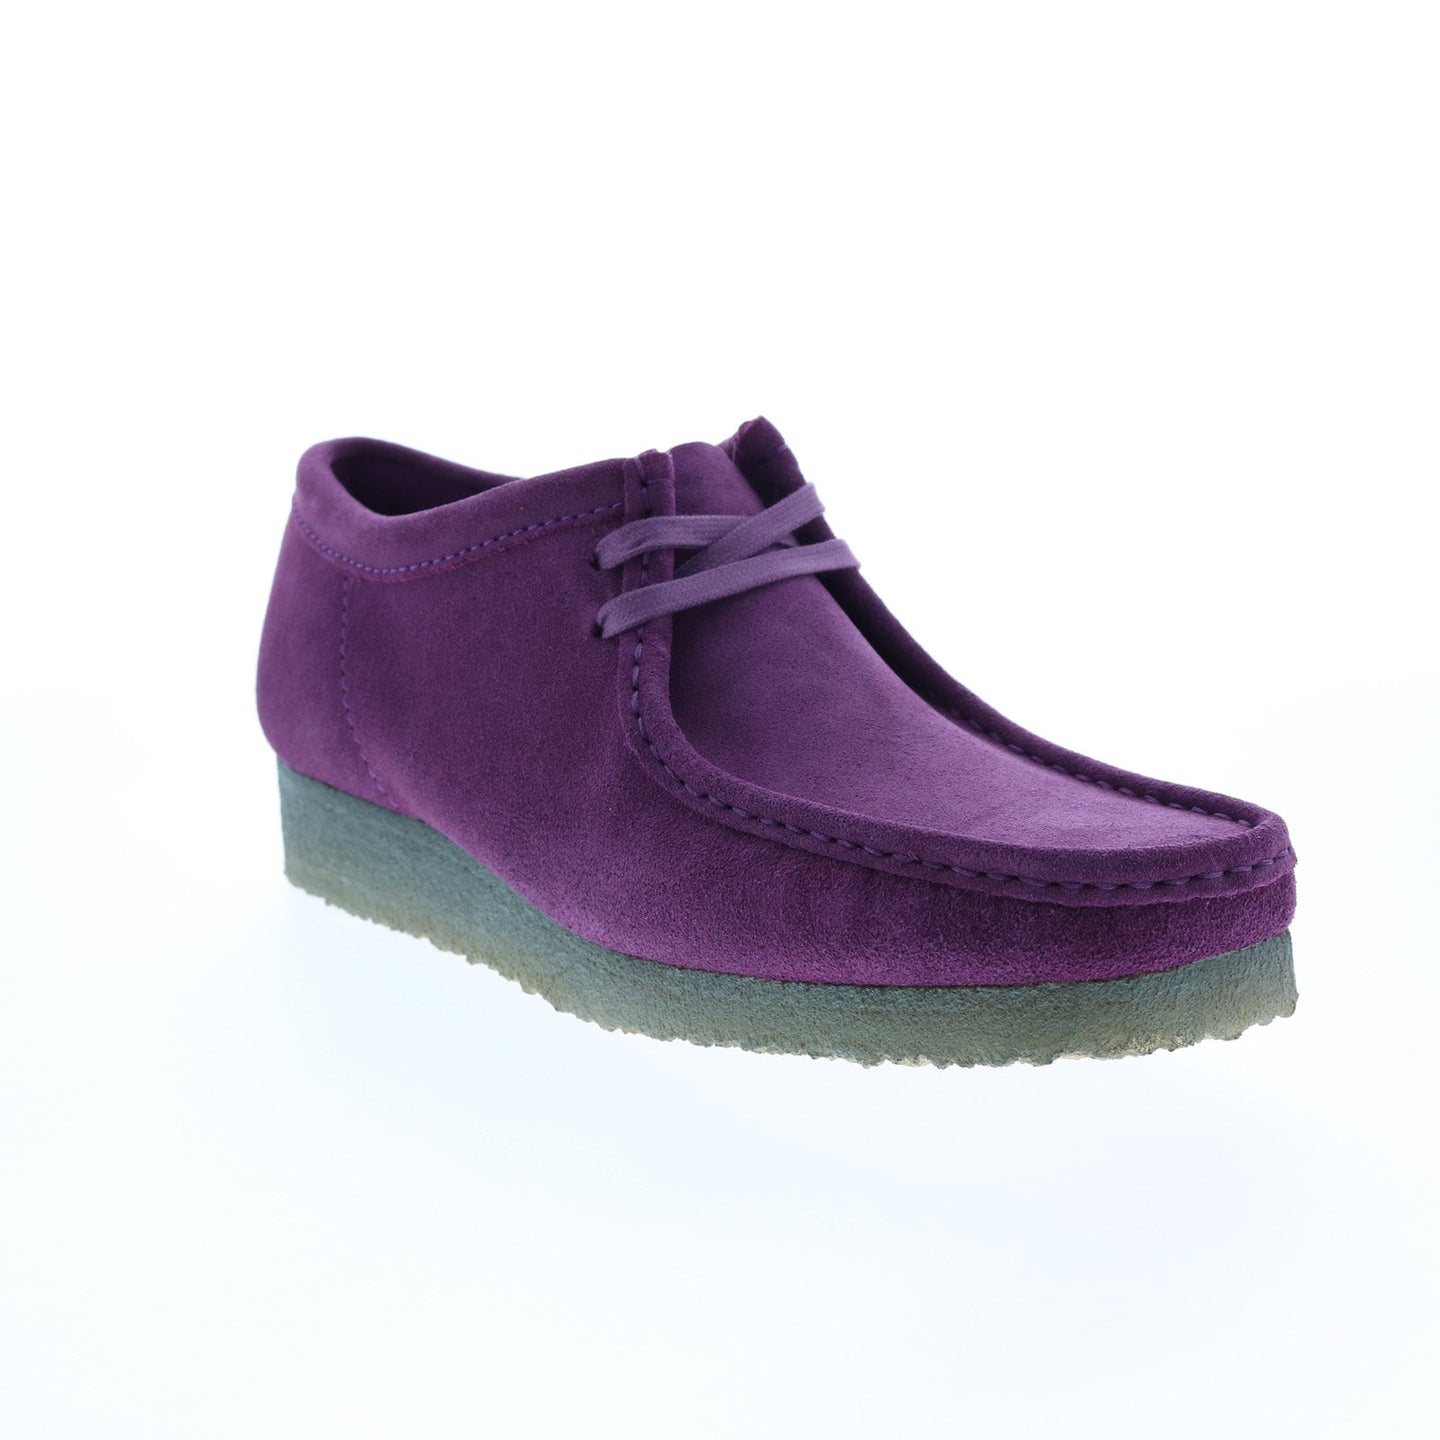 Clarks Wallabee 26168860 Mens Purple Suede Oxfords & Lace Ups Casual S ...